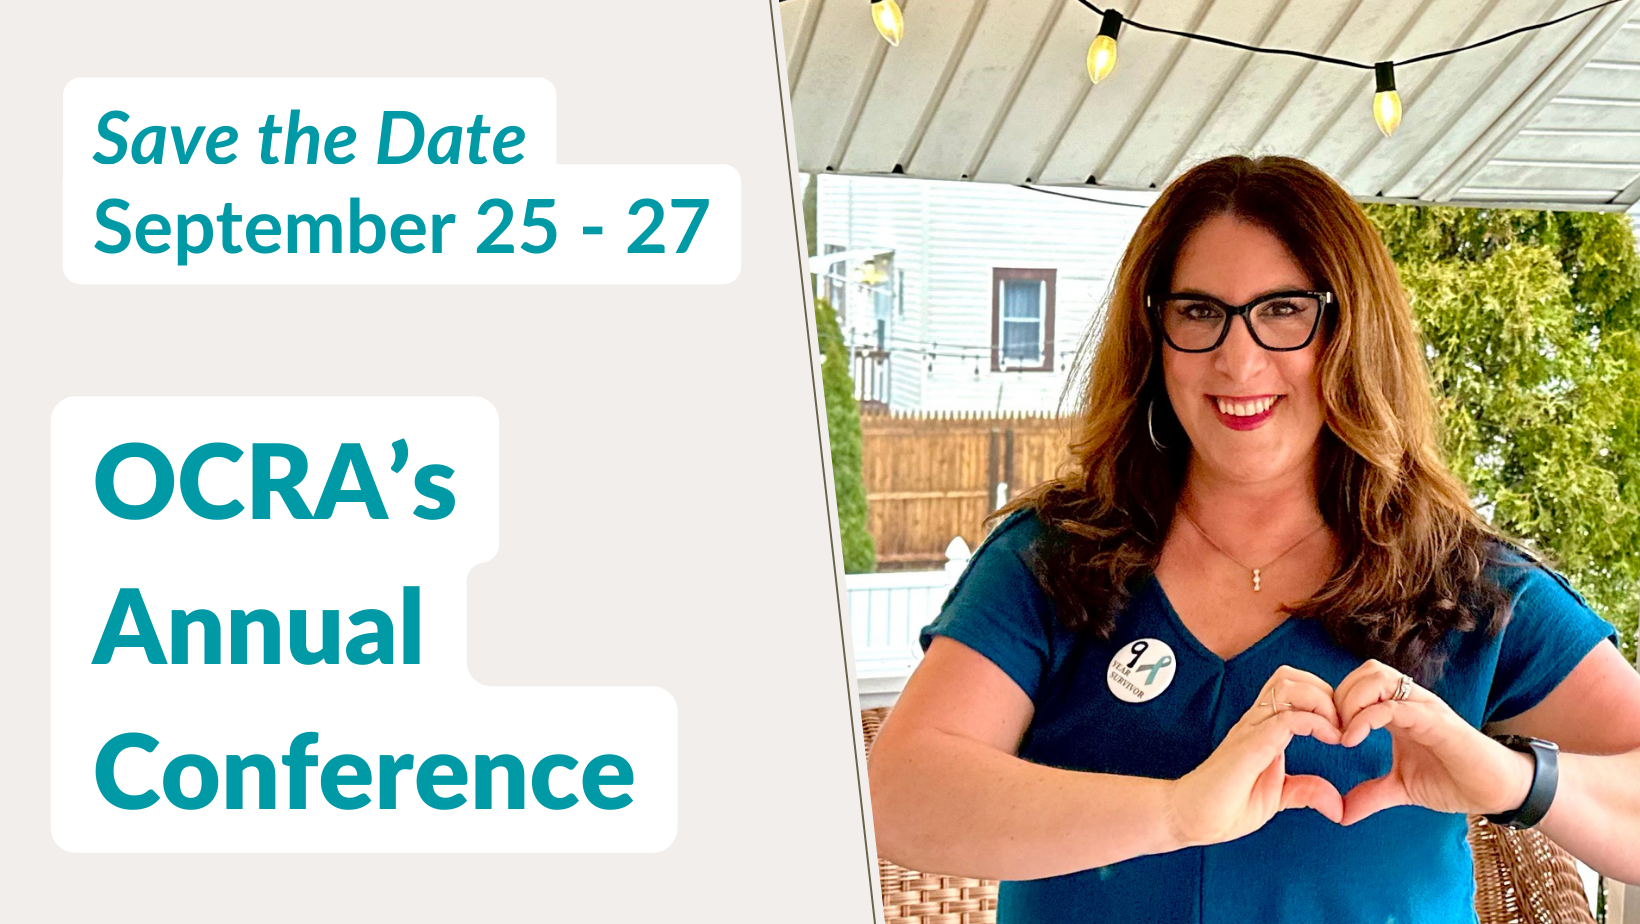 Photo and text side by side. Text: Save the Date, September 25 - 27. OCRA's Annual Conference. Photo: A smiling woman with long hair, glasses, teal shirt, and a pin displaying the words "9 Year Survivor" with a teal ribbon, makes the heart sign with her two hands held together.